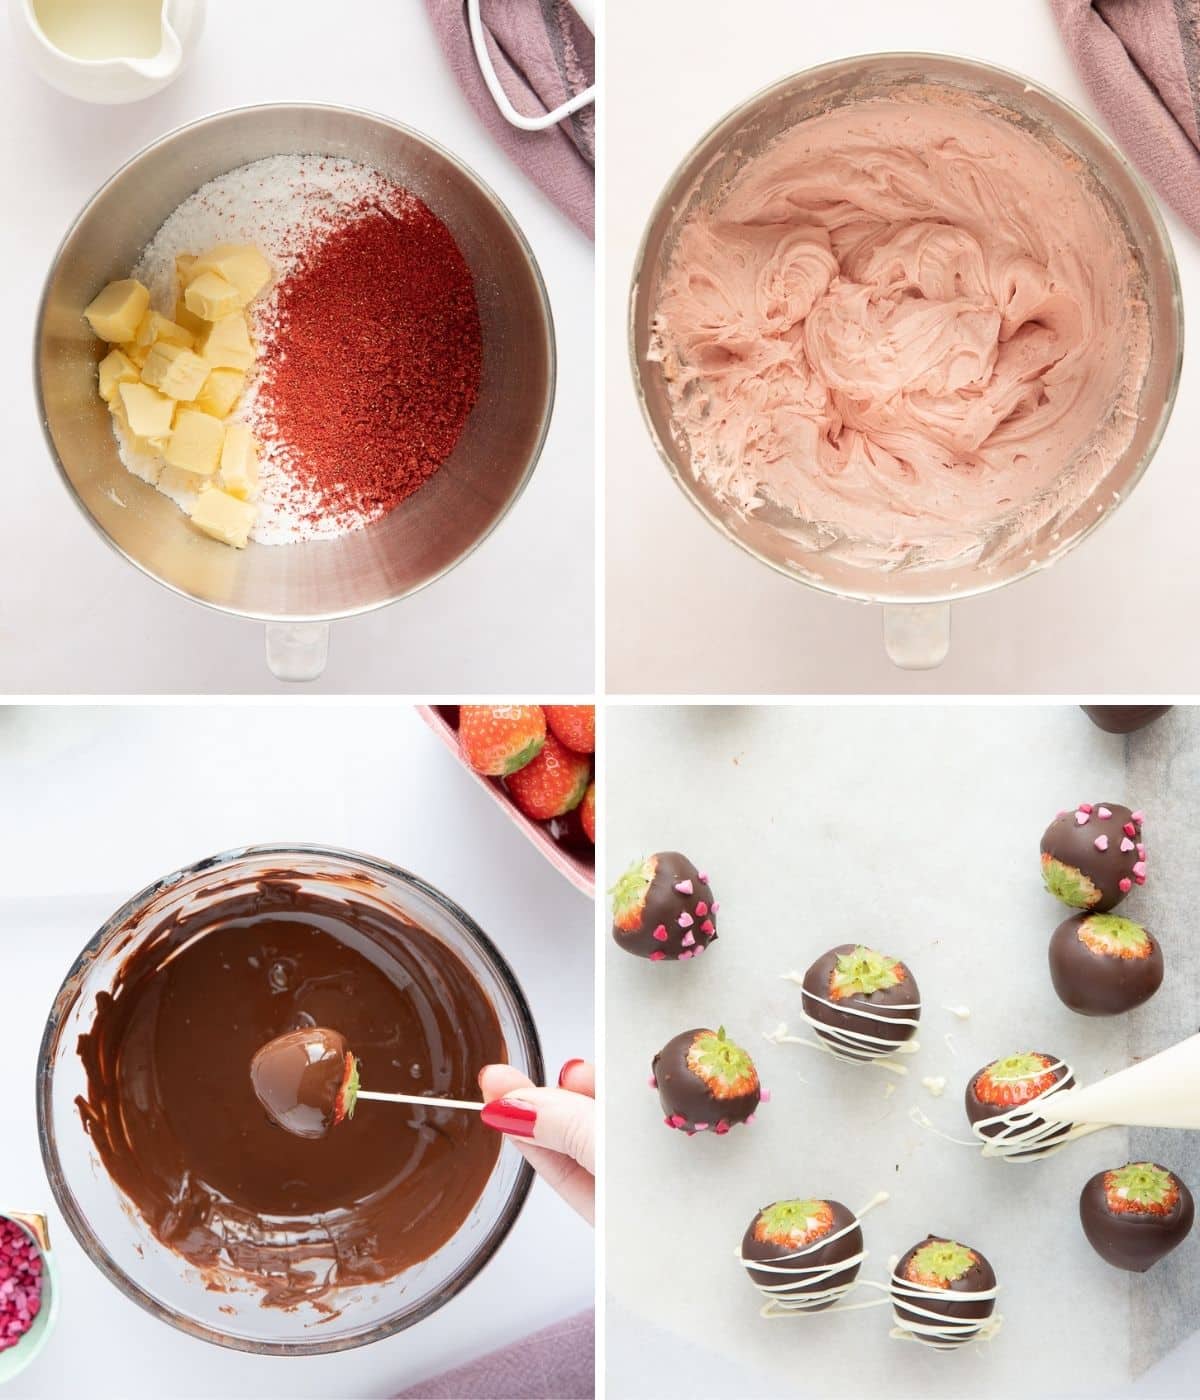 A collage of 4 images showing how to make strawberry buttercream frosting and chocolate covered strawberries.